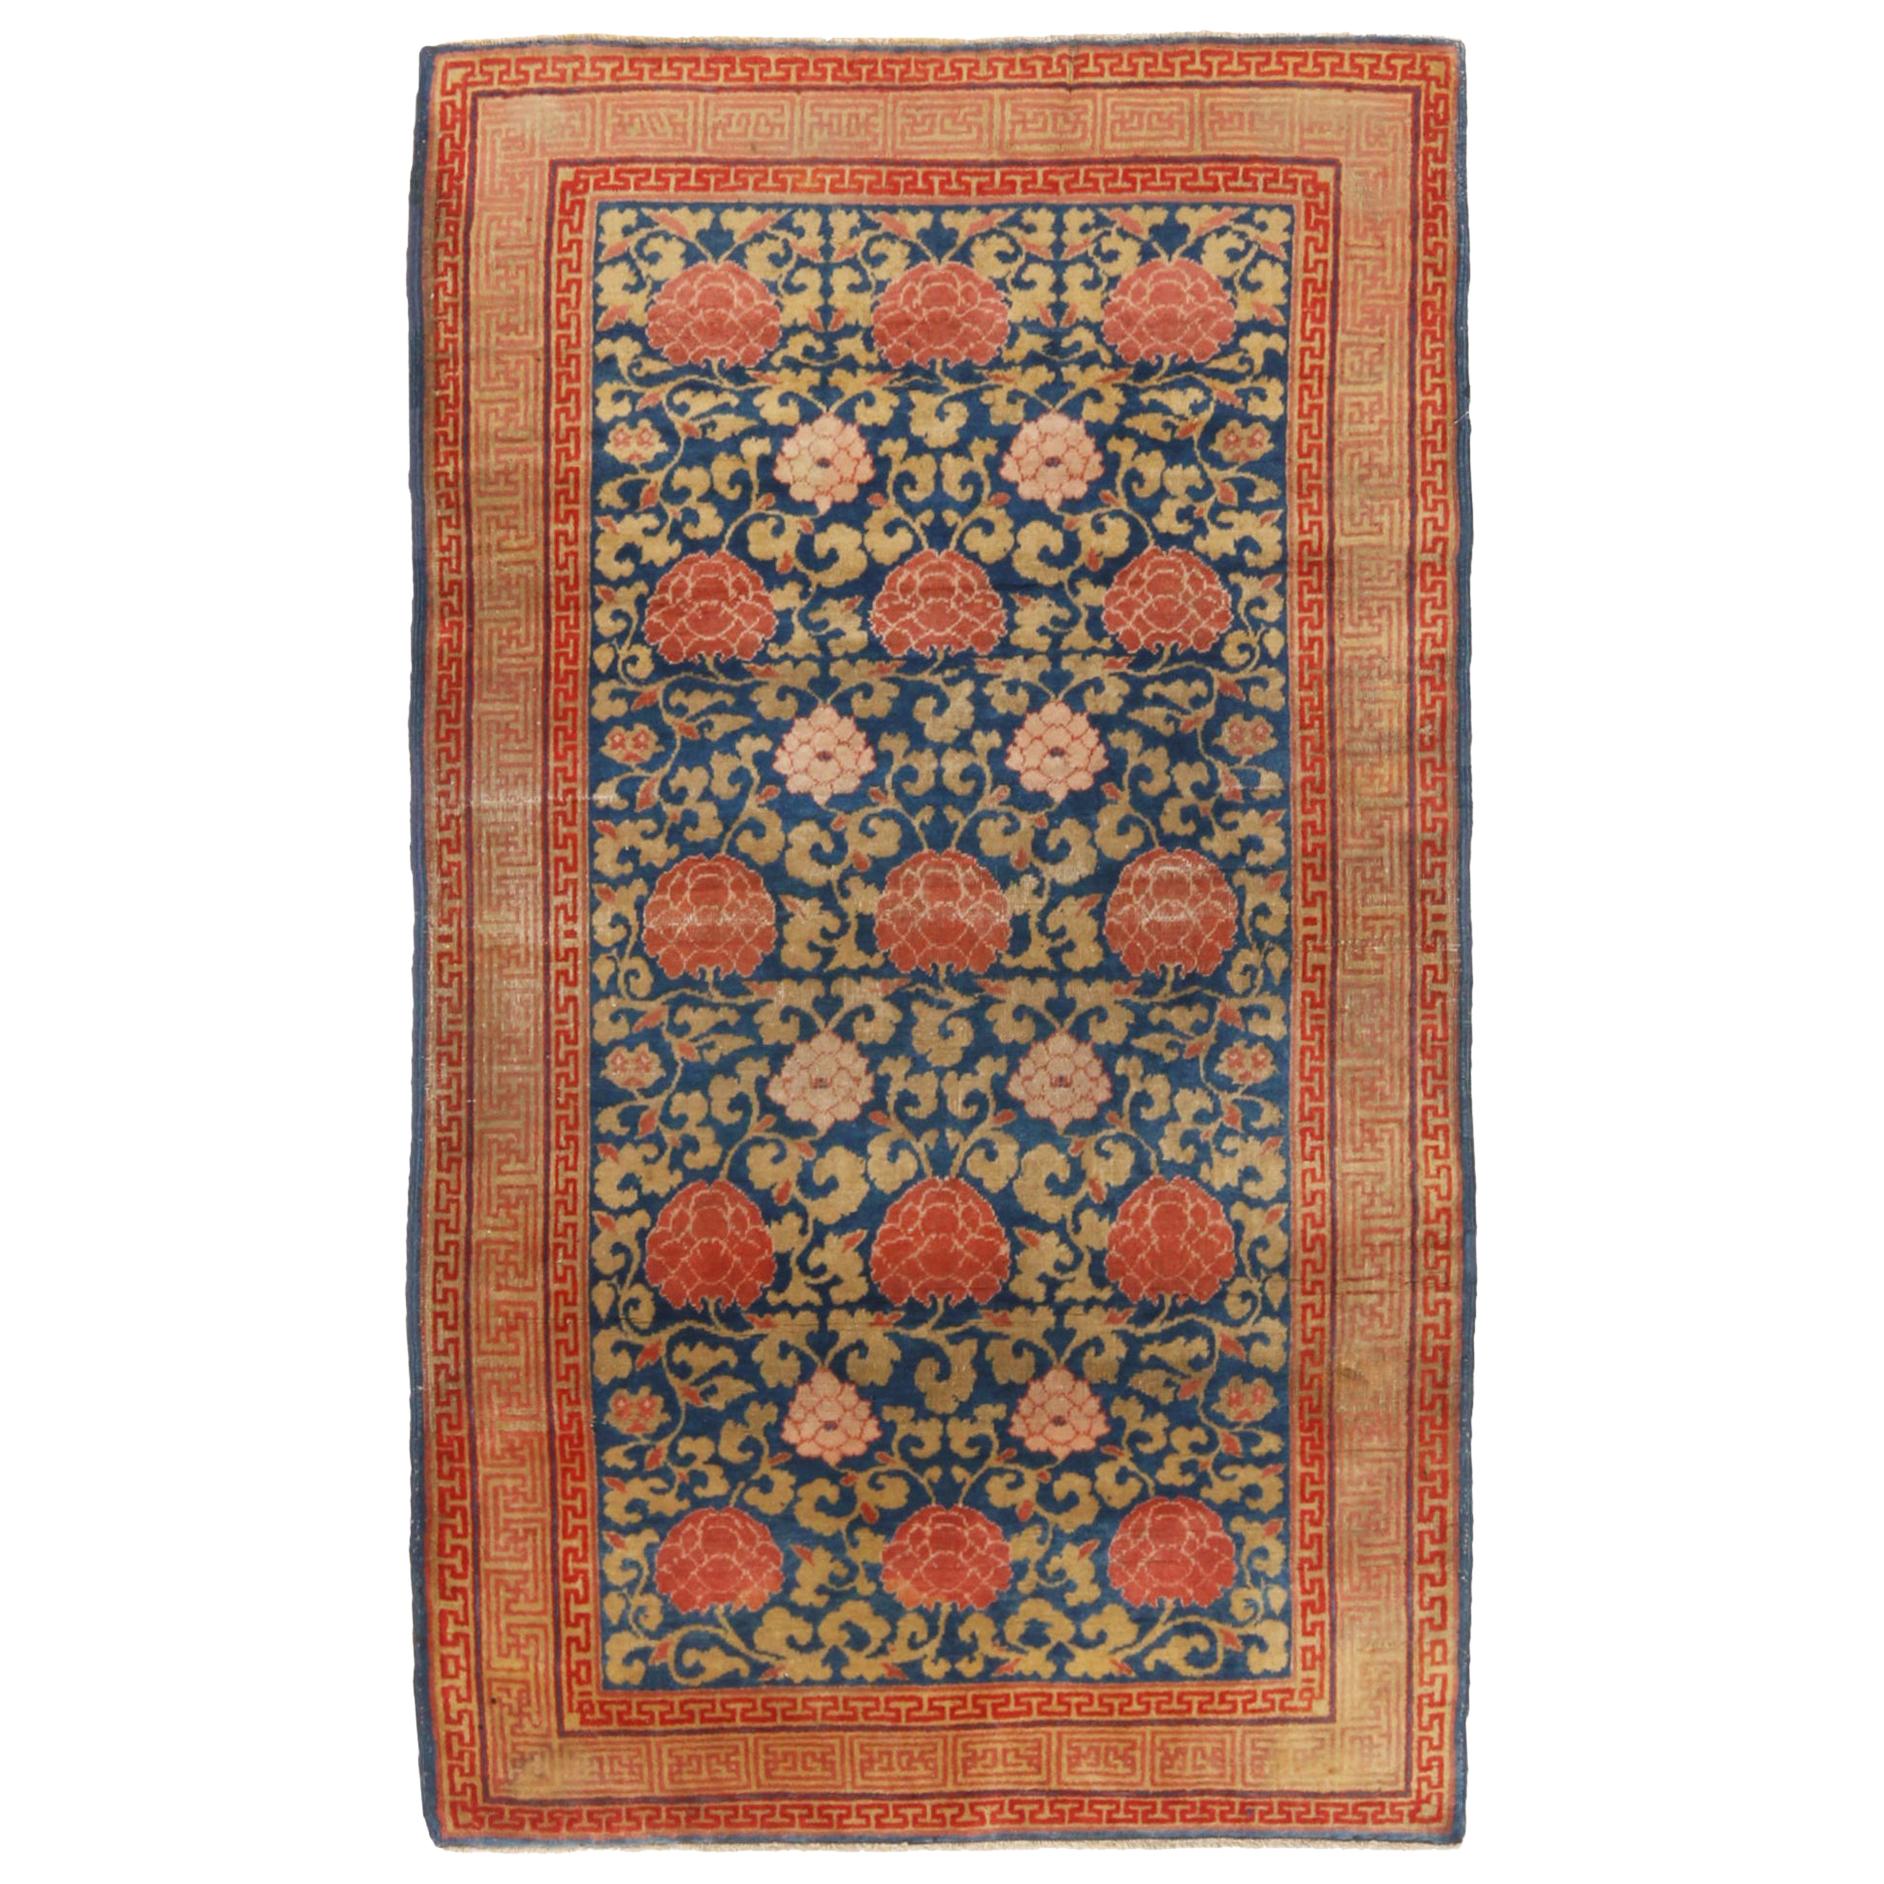 Antique Khotan Samarkand Transitional in Blue and Red Floral